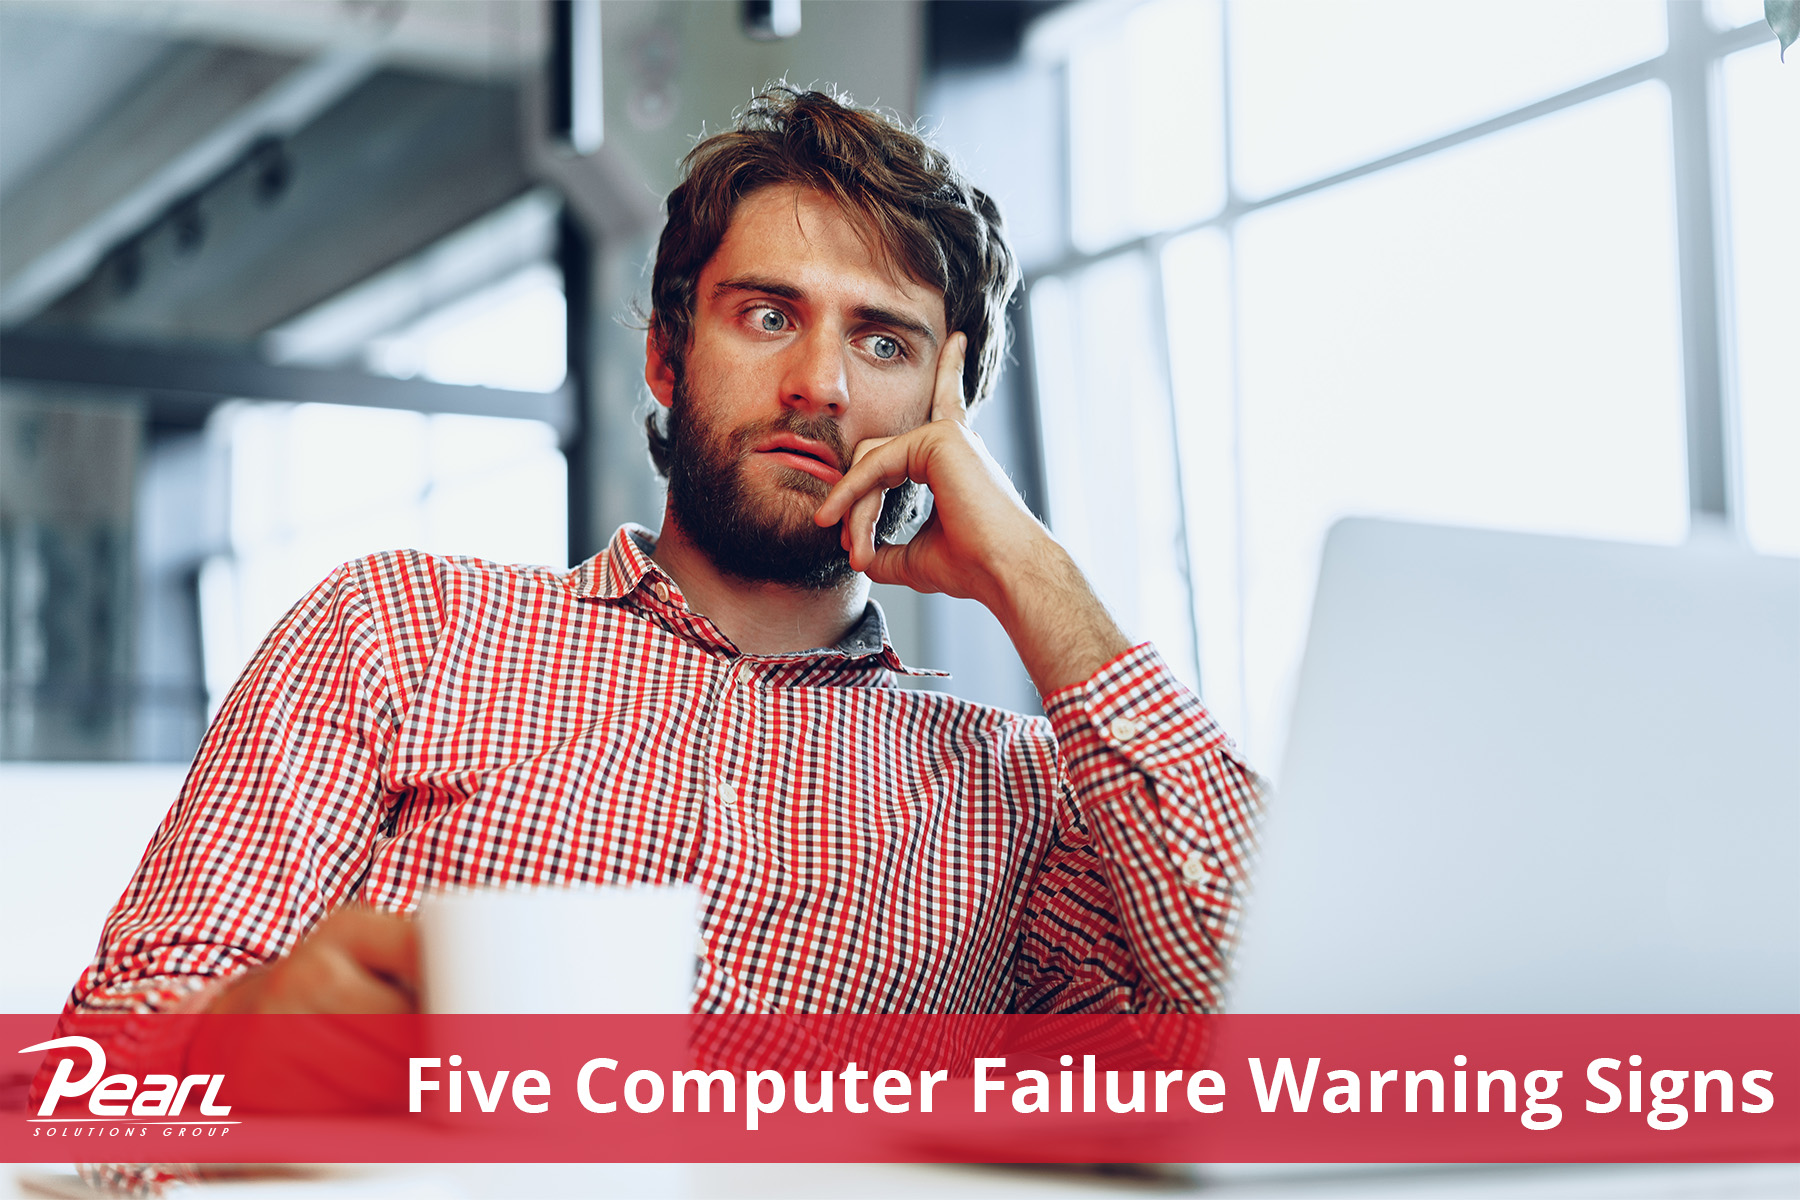 Five Computer Failure Warning Signs